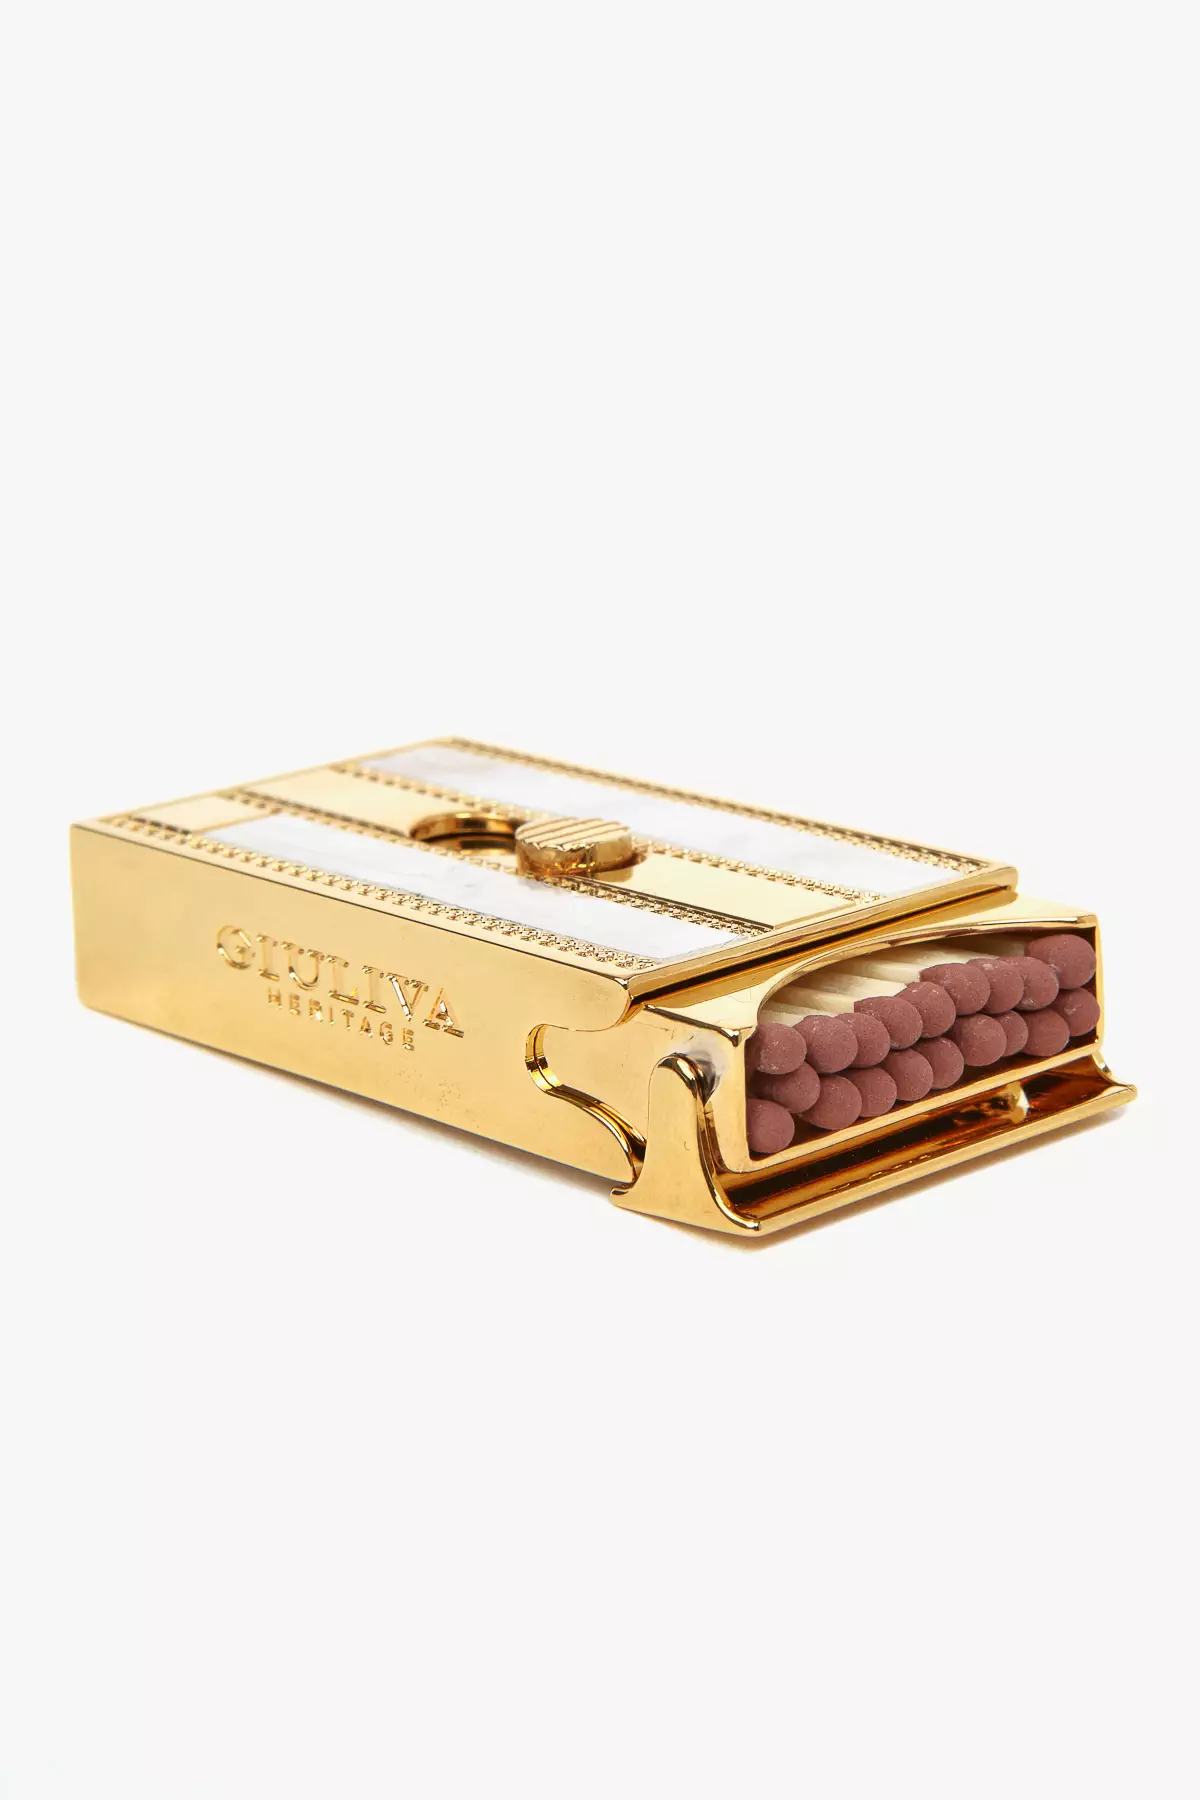 Giuliva Heritage Matches Box in Brass with Gold Finish